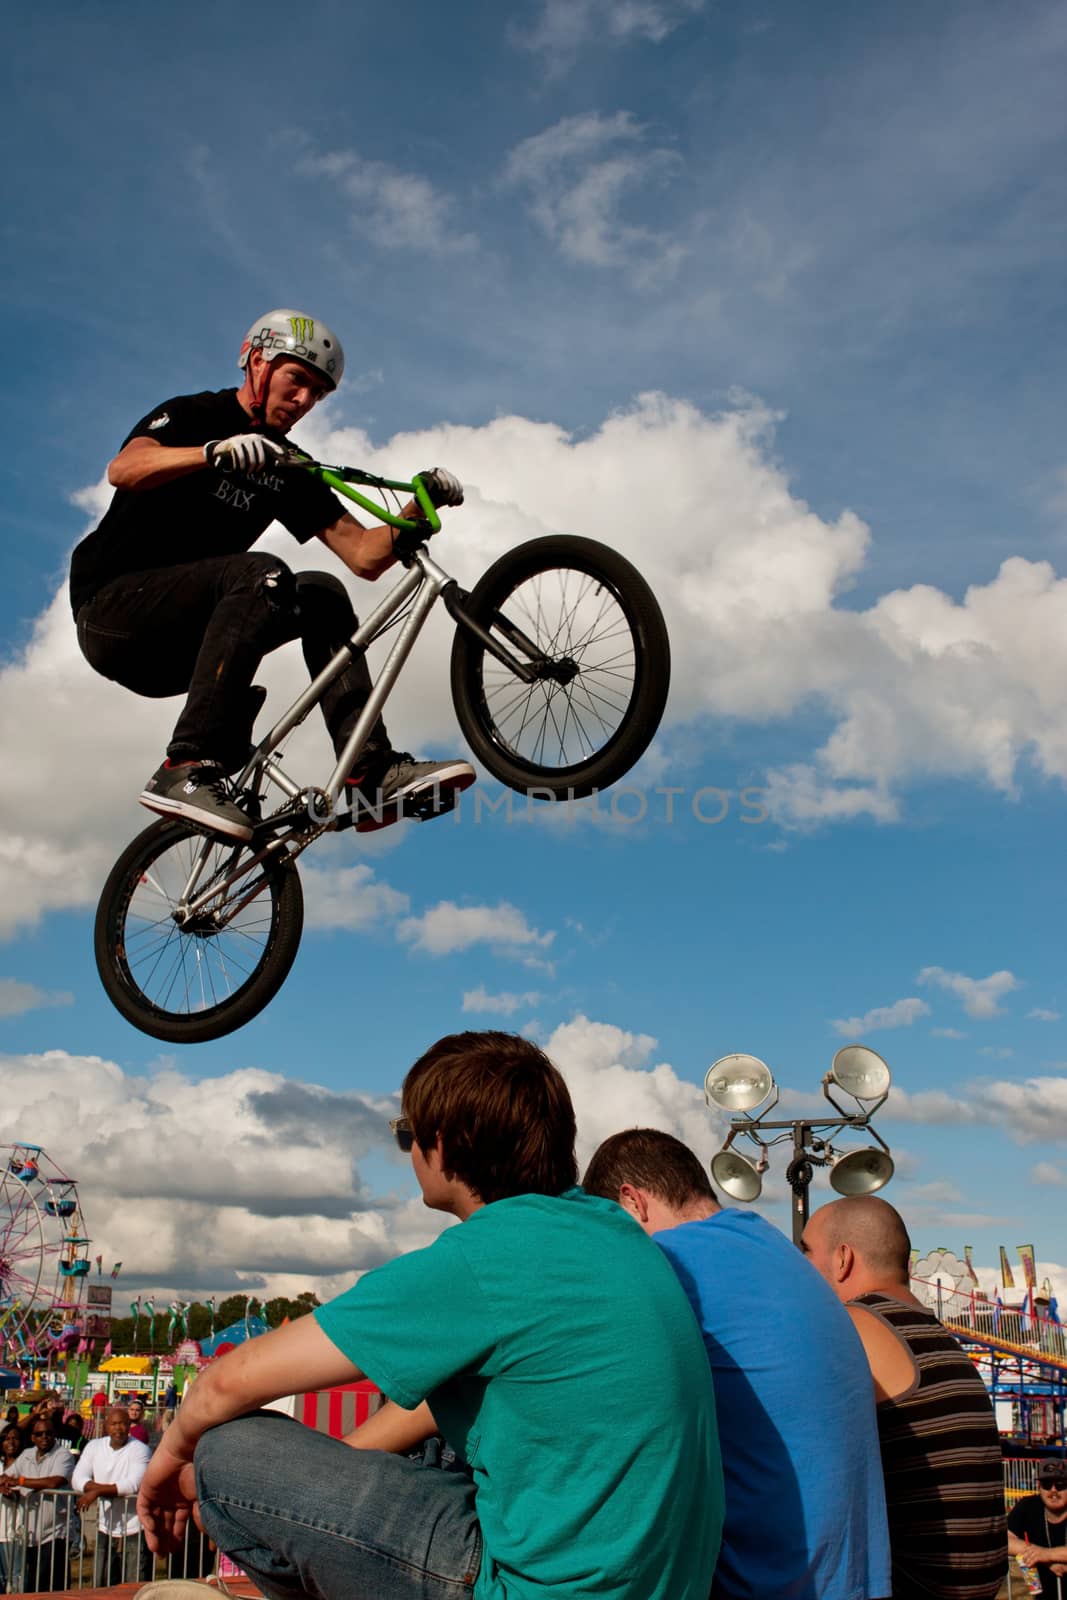 Hampton, GA, USA - September 27, 2014:  A young man with the High Roller BMX club performs a stunt jumping directly over three teen audience members sitting on the ramp, at the Georgia State Fair.